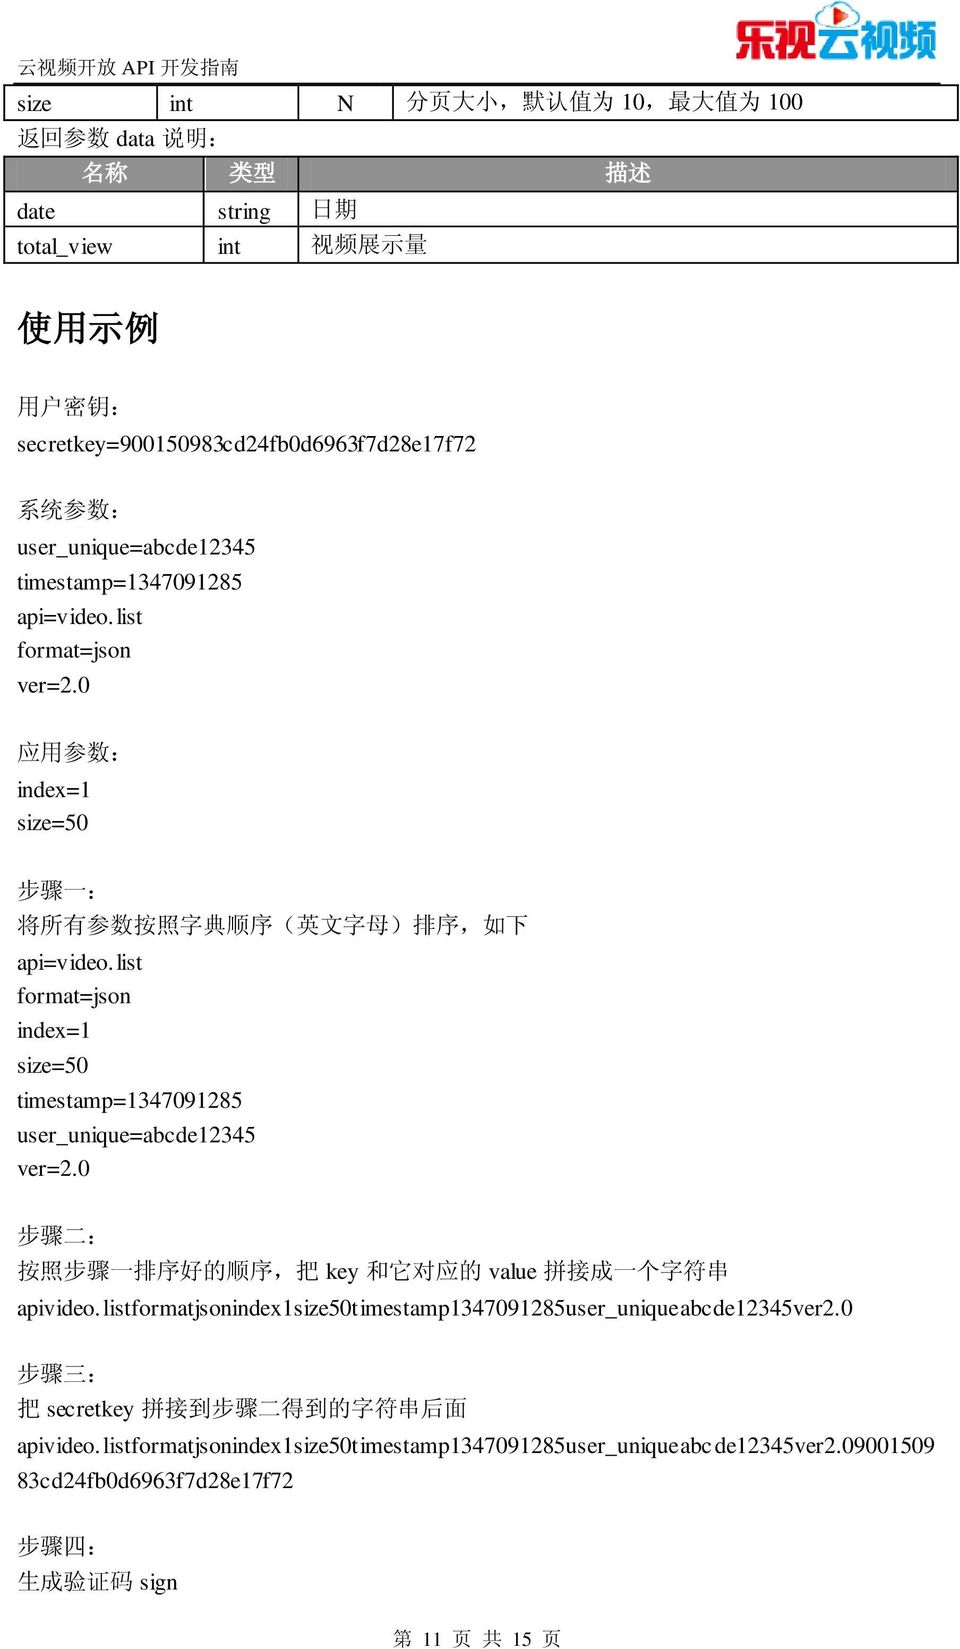 list format=json index=1 size=50 timestamp=1347091285 user_unique=abcde12345 ver=2.0 步 骤 二 : 按 照 步 骤 一 排 序 好 的 顺 序, 把 key 和 它 对 应 的 value 拼 接 成 一 个 字 符 串 apivideo.